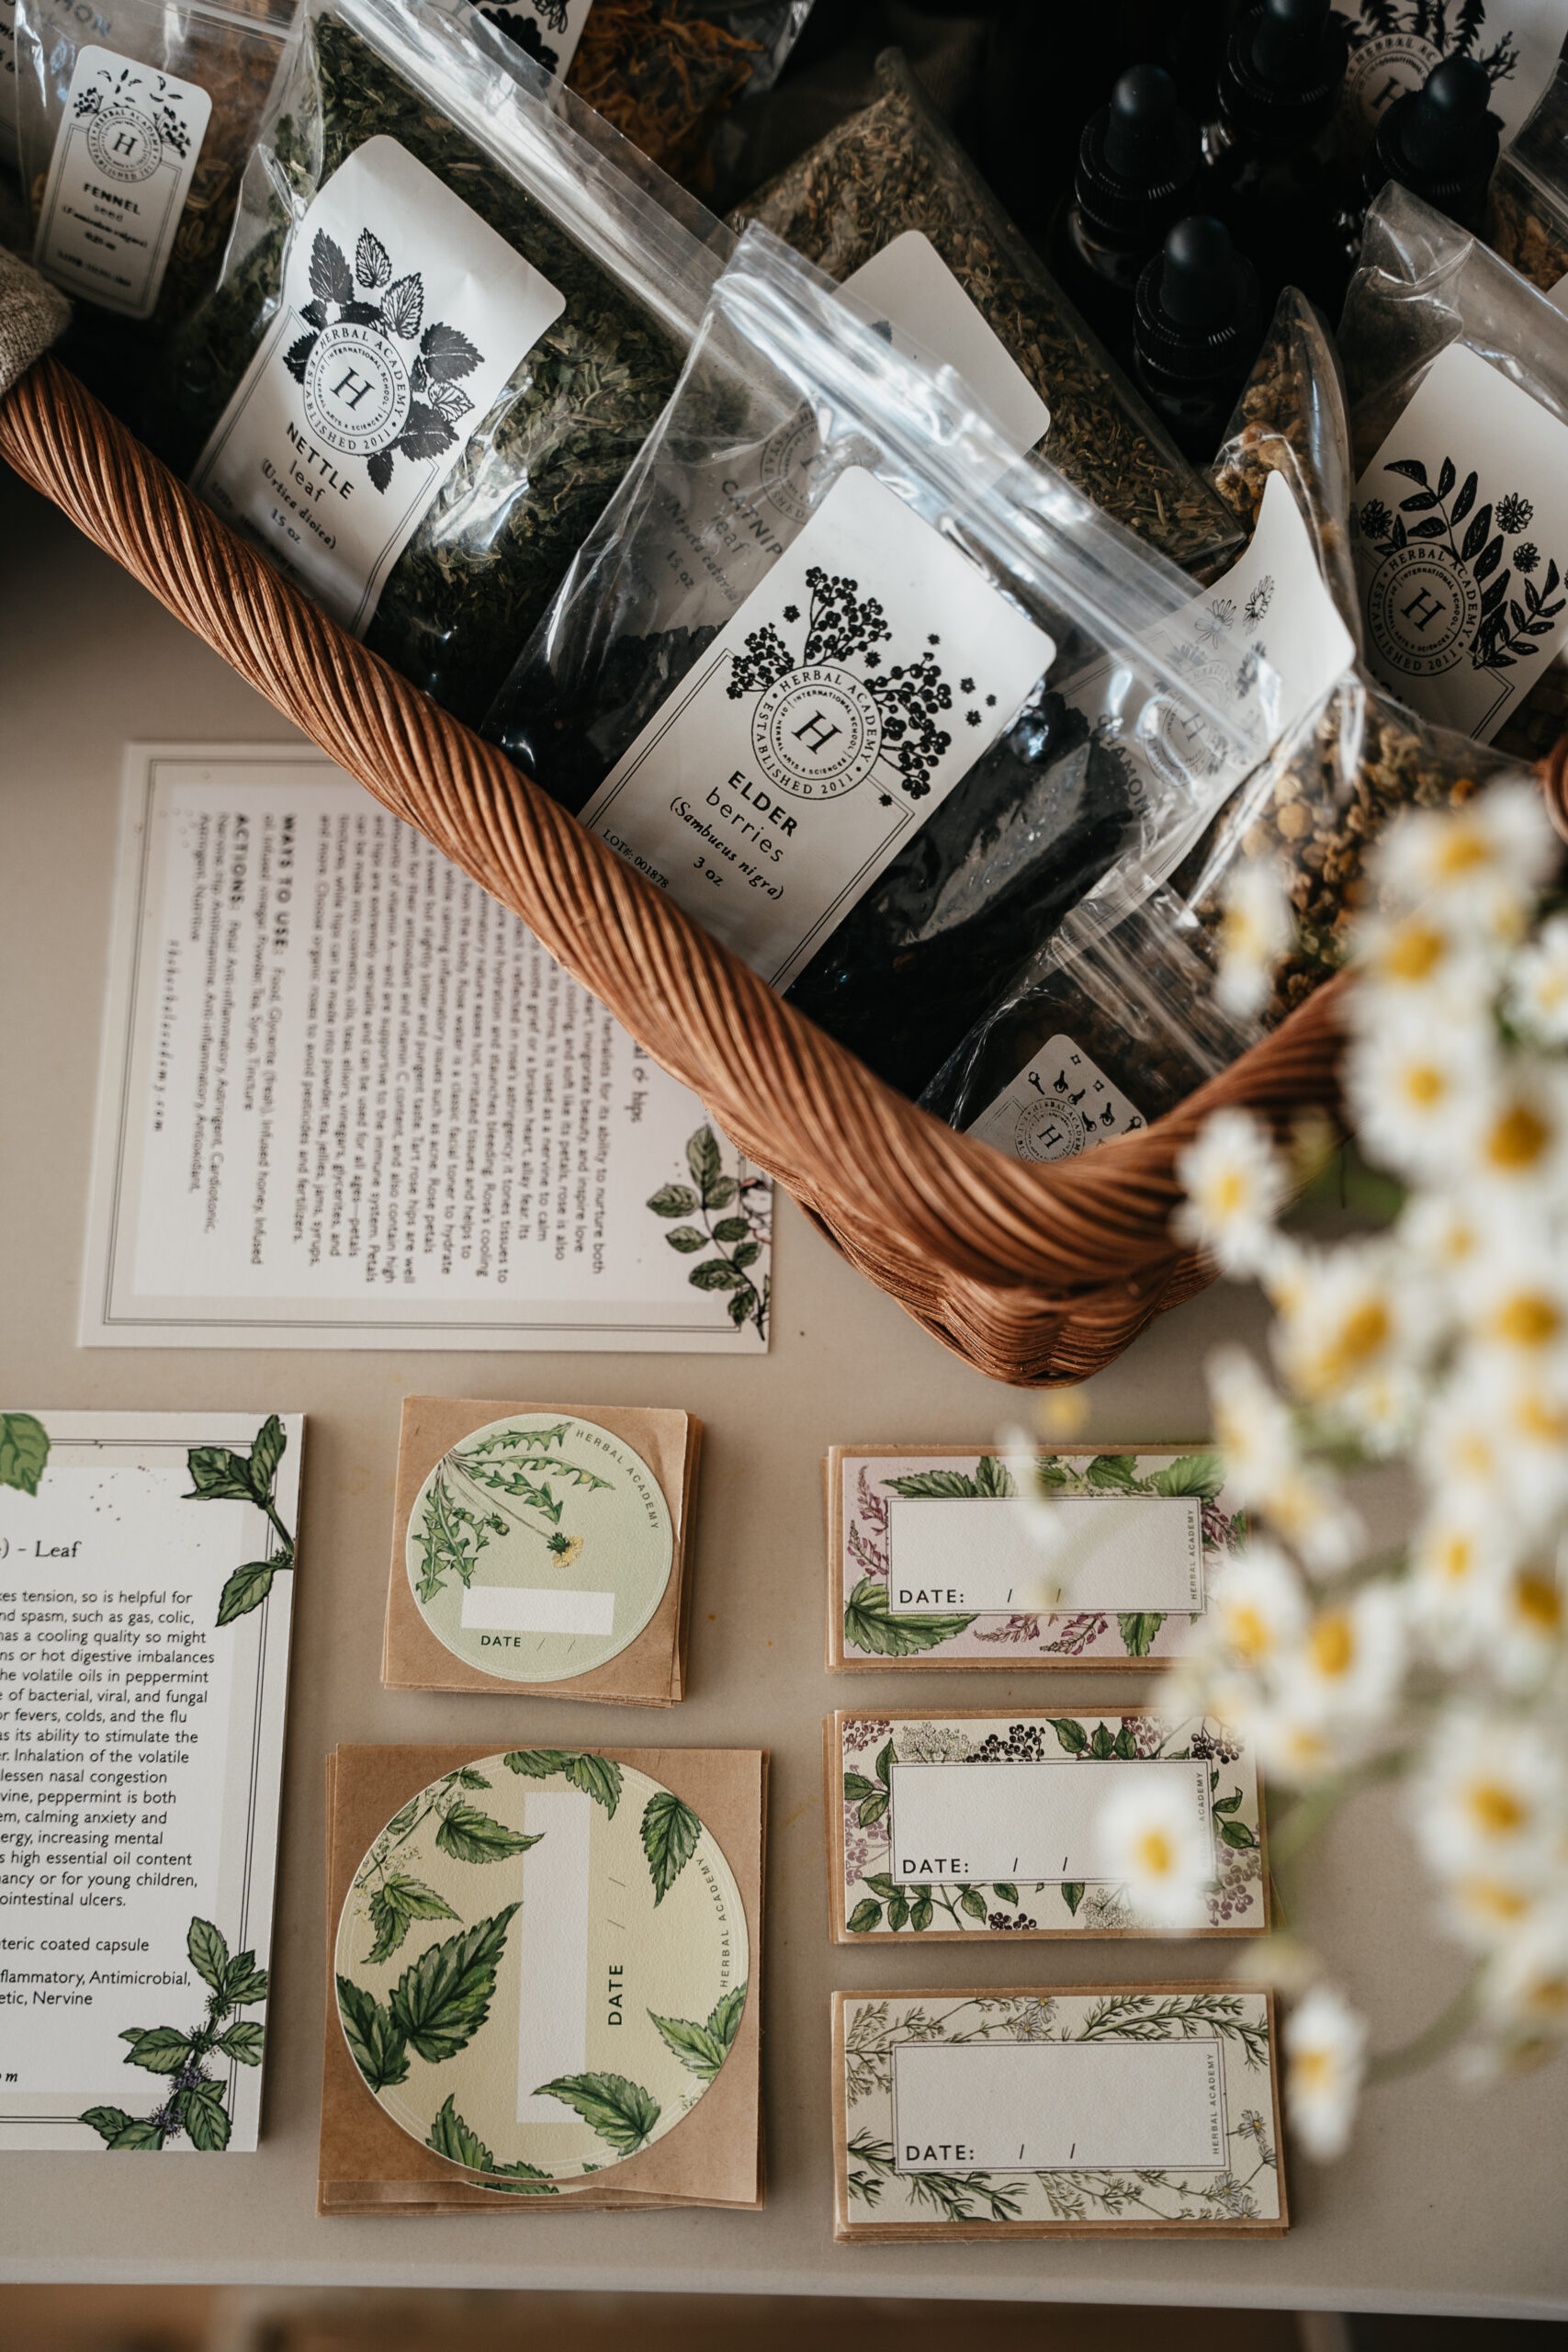 Start Your Own Apothecary Kit — Native Roots Healing-Ancestral